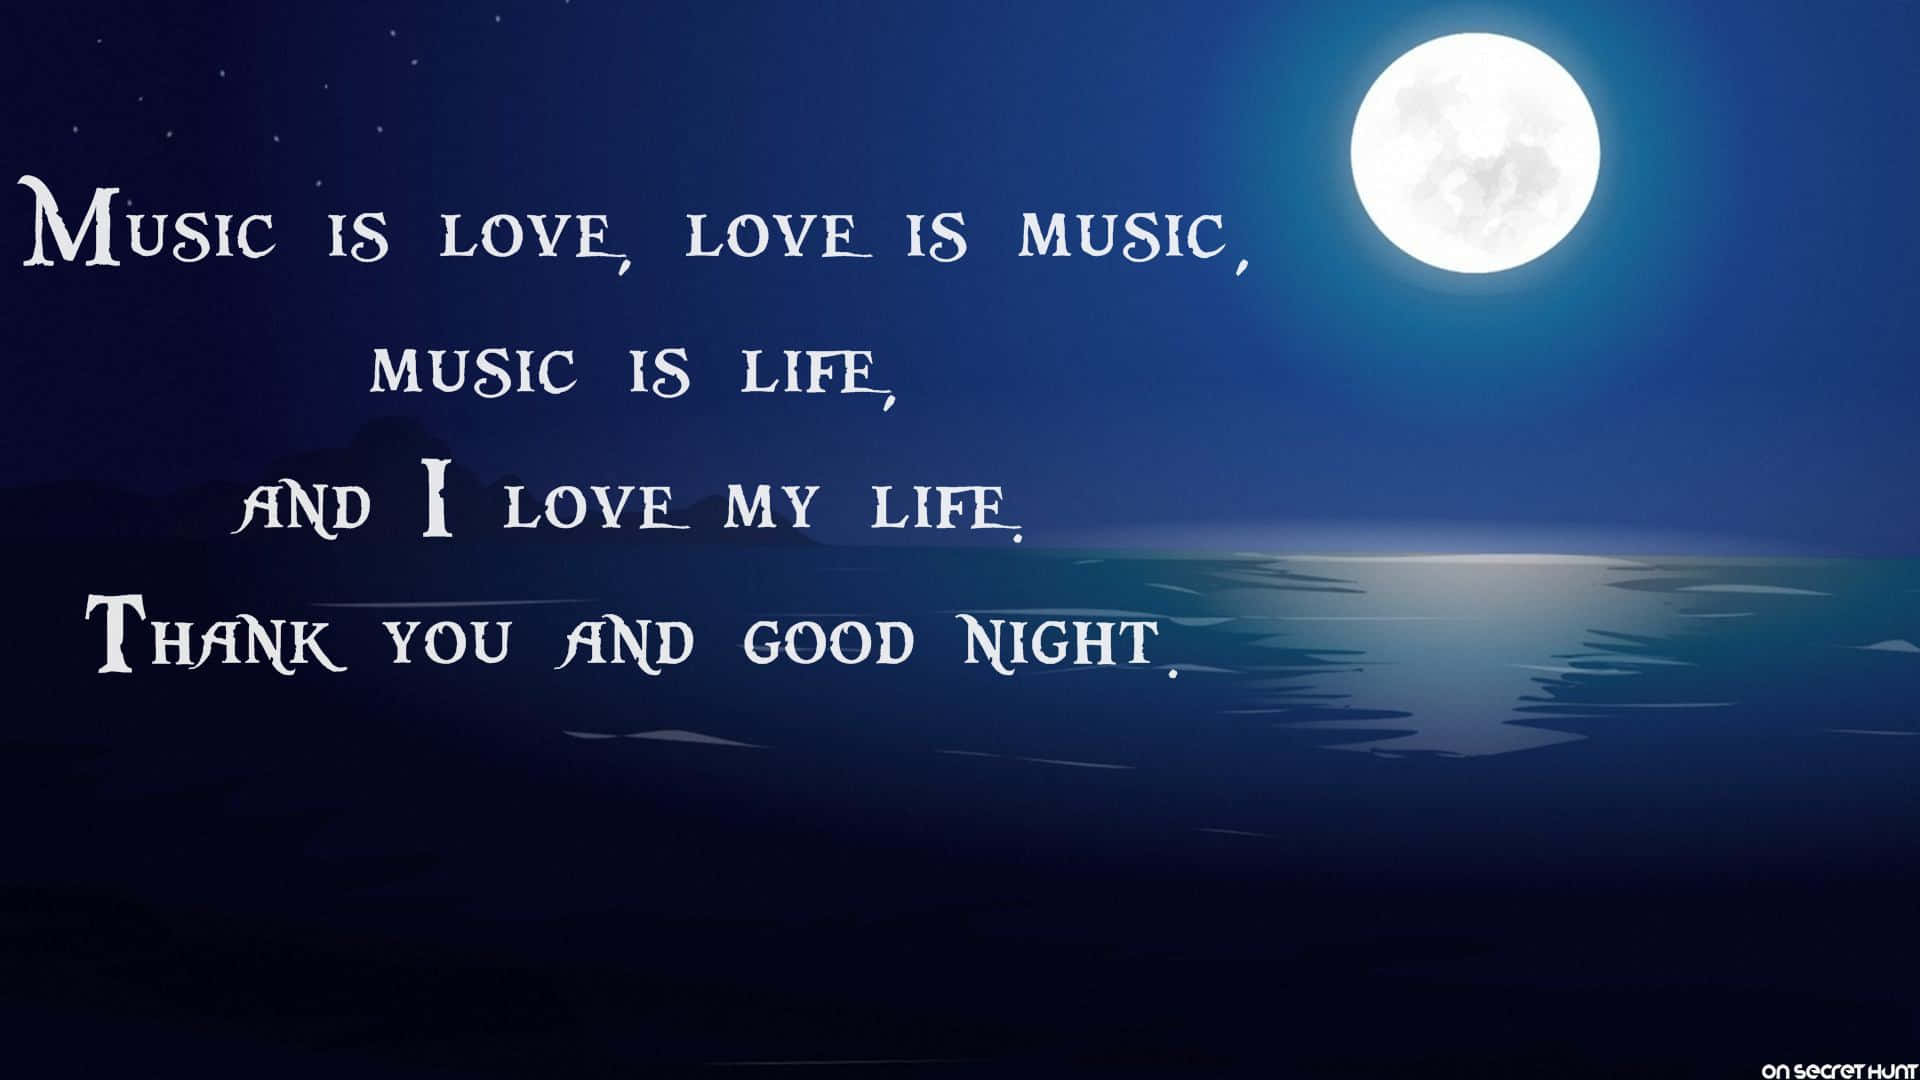 Music Is Love Is Music Is Life And My Love Is Music And My Good Night Wallpaper